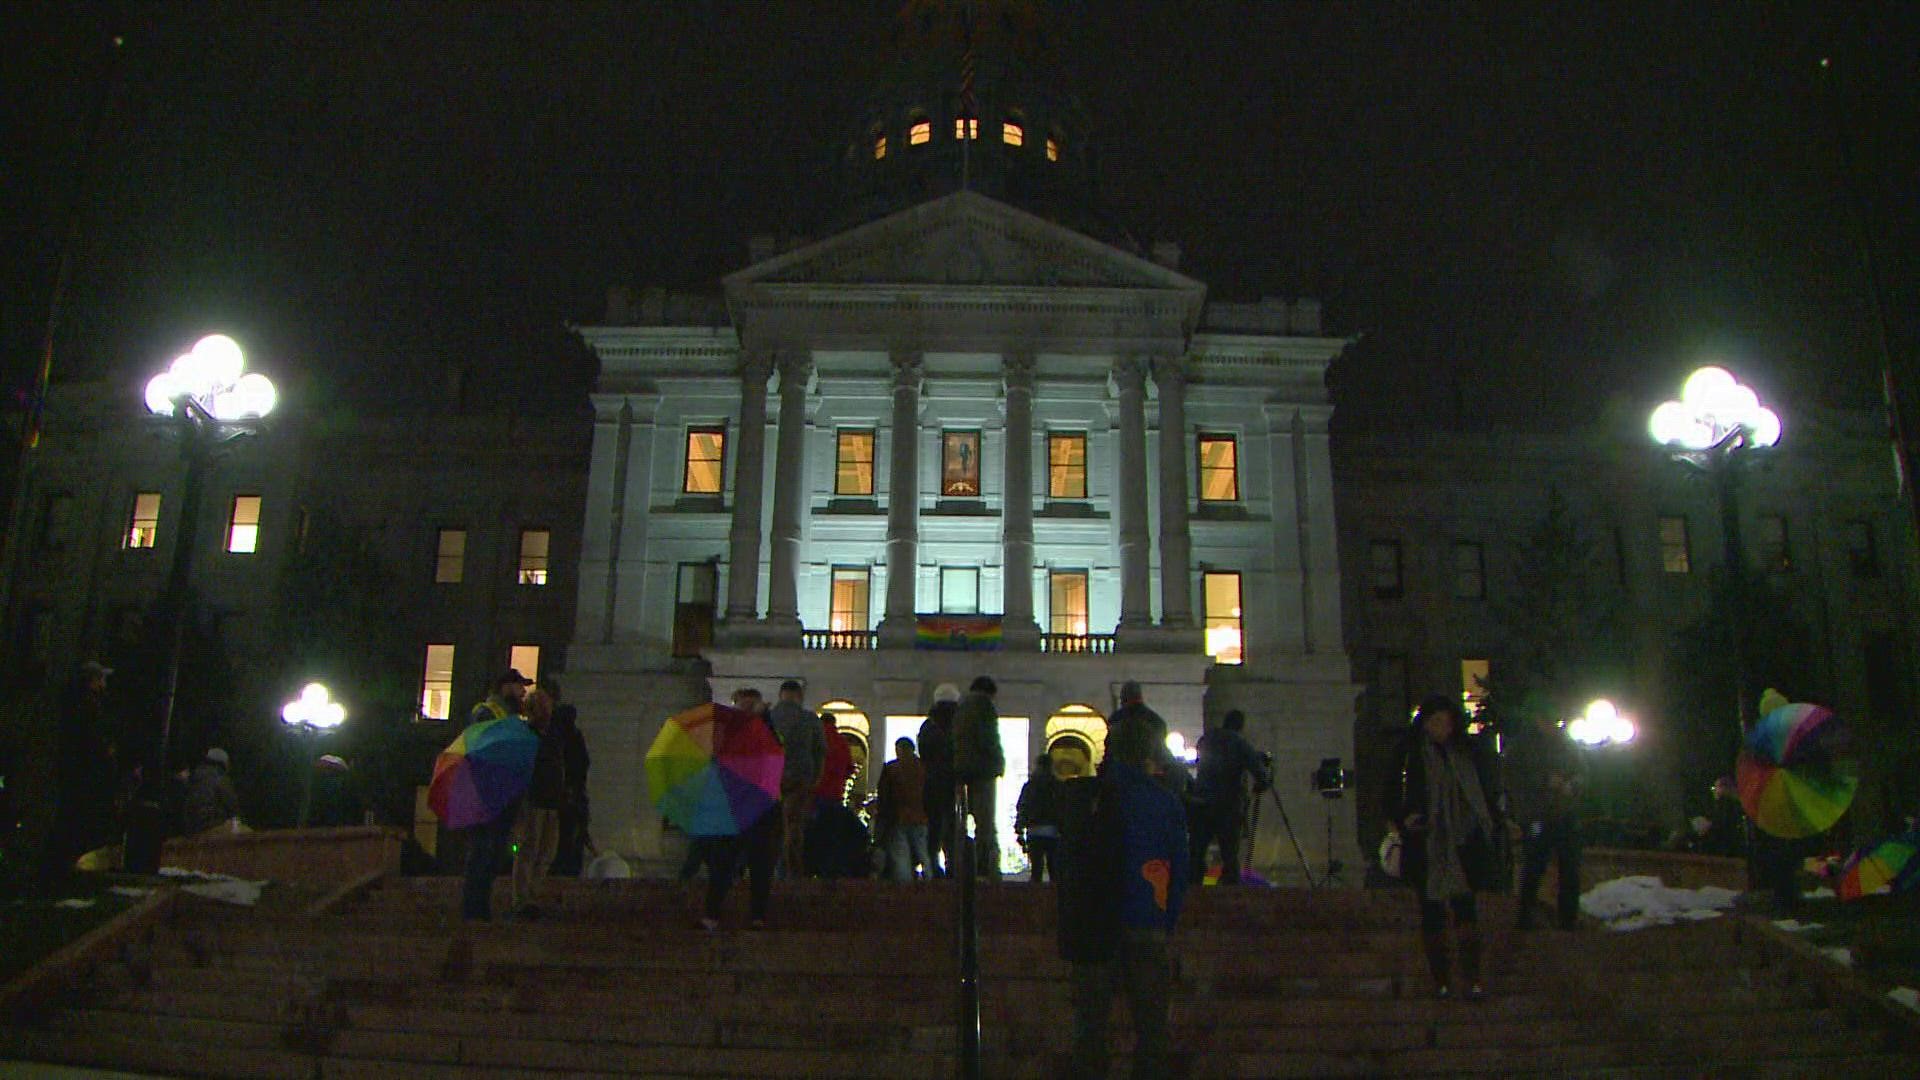 Vigil speakers shared stories, poems and prayers for the five victims of the Club Q shooting in Colorado Springs.